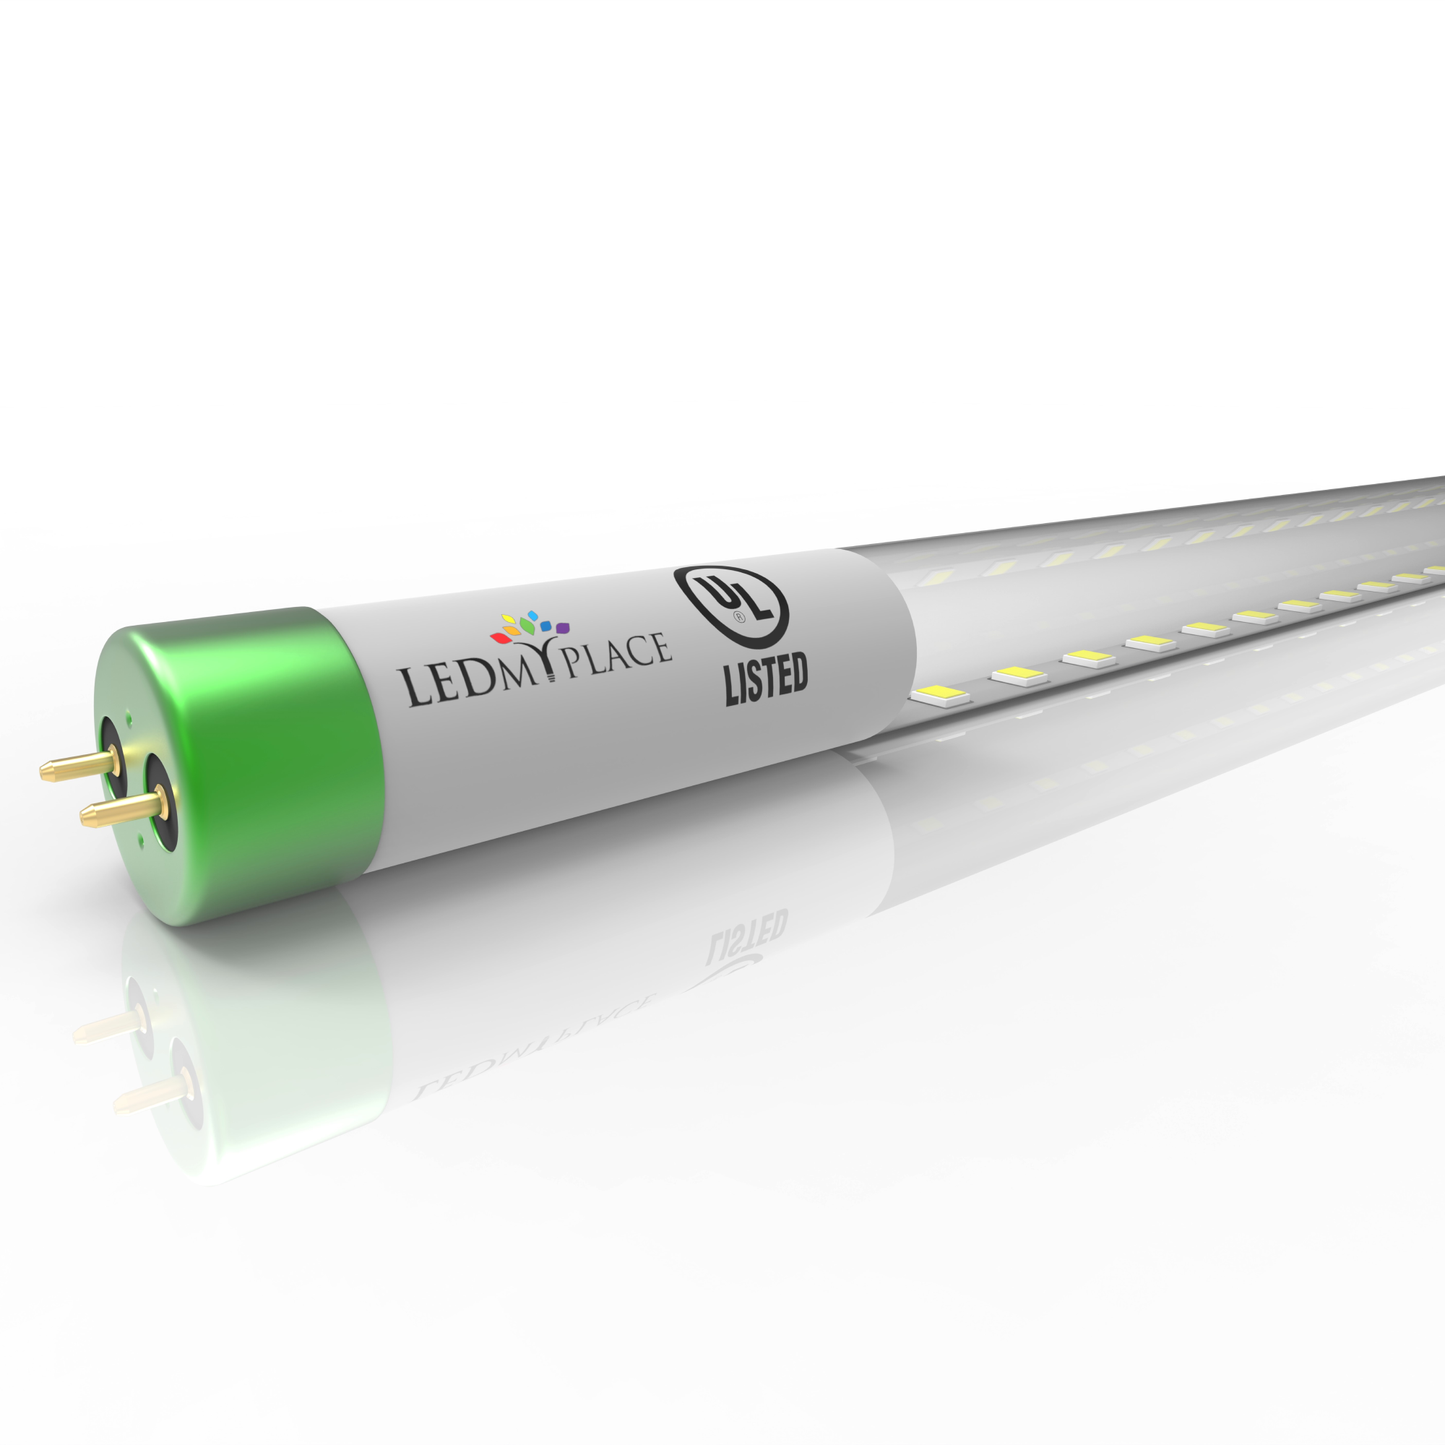 Hybrid T8 4ft LED Tube/Bulb - Glass 18W 2400 Lumens 4000K Clear, Single End/Double End Power - Ballast Compatible or Bypass (Check Compatibility List)